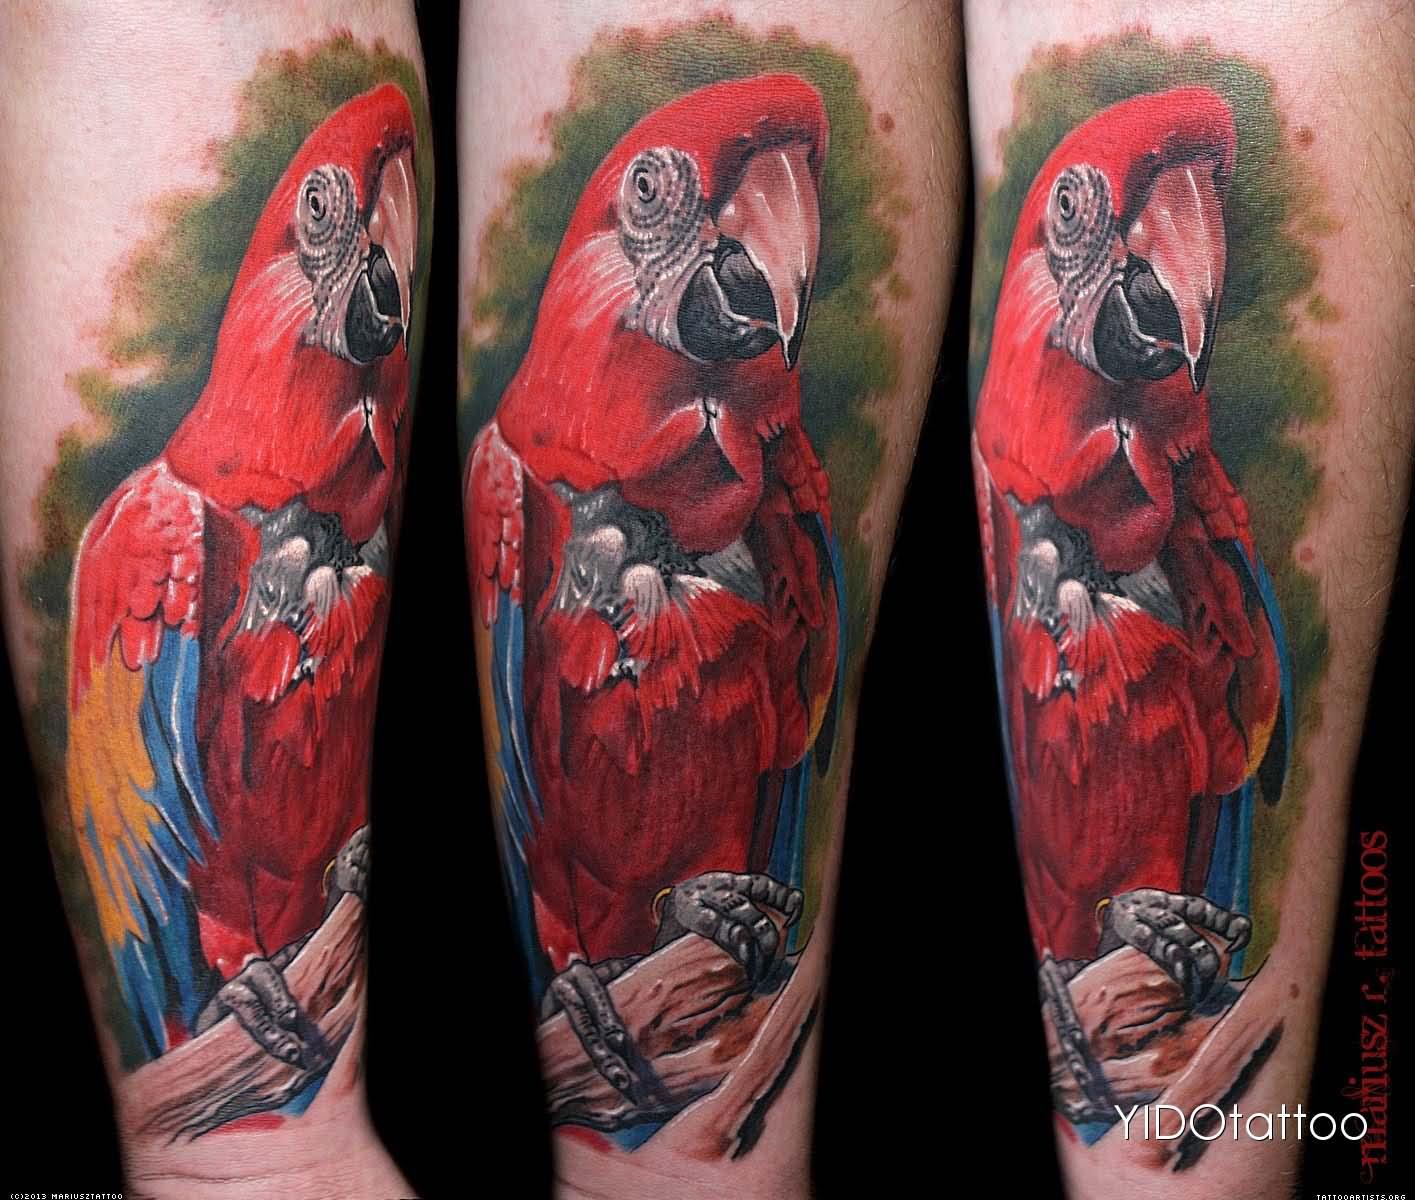 Inspiring Colorful Parrot Tattoo Design For Forearm